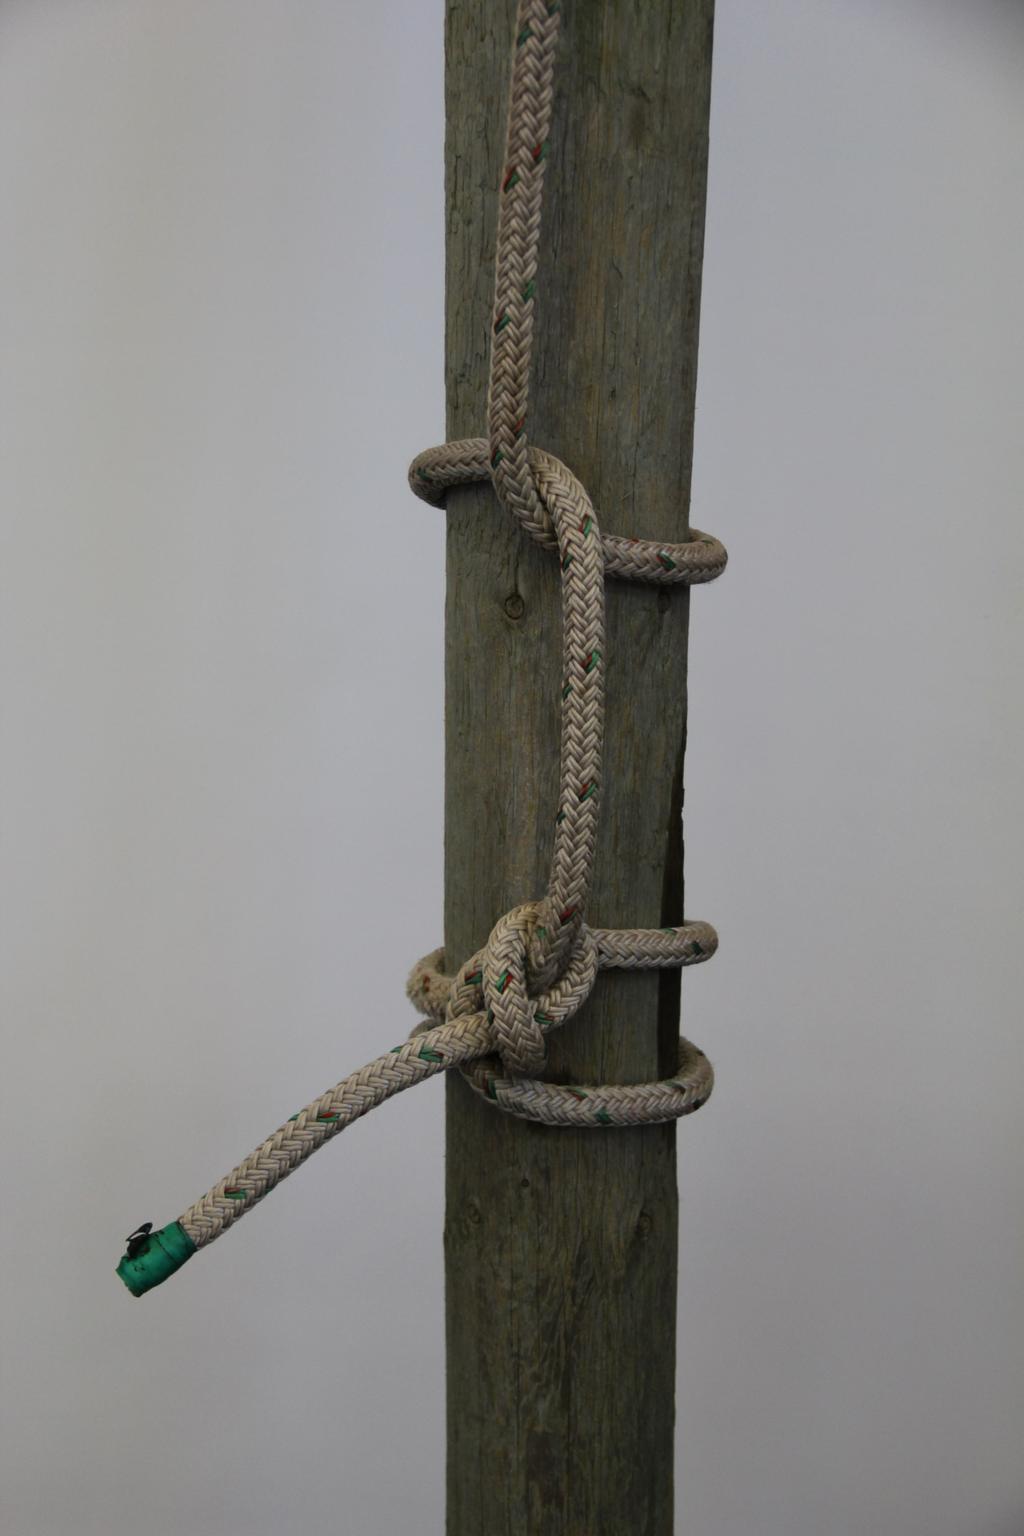 Half hitch / Marline hitch: both of these hitches are used in tree work to back up other knots for additional security and, in some instances, even strength.